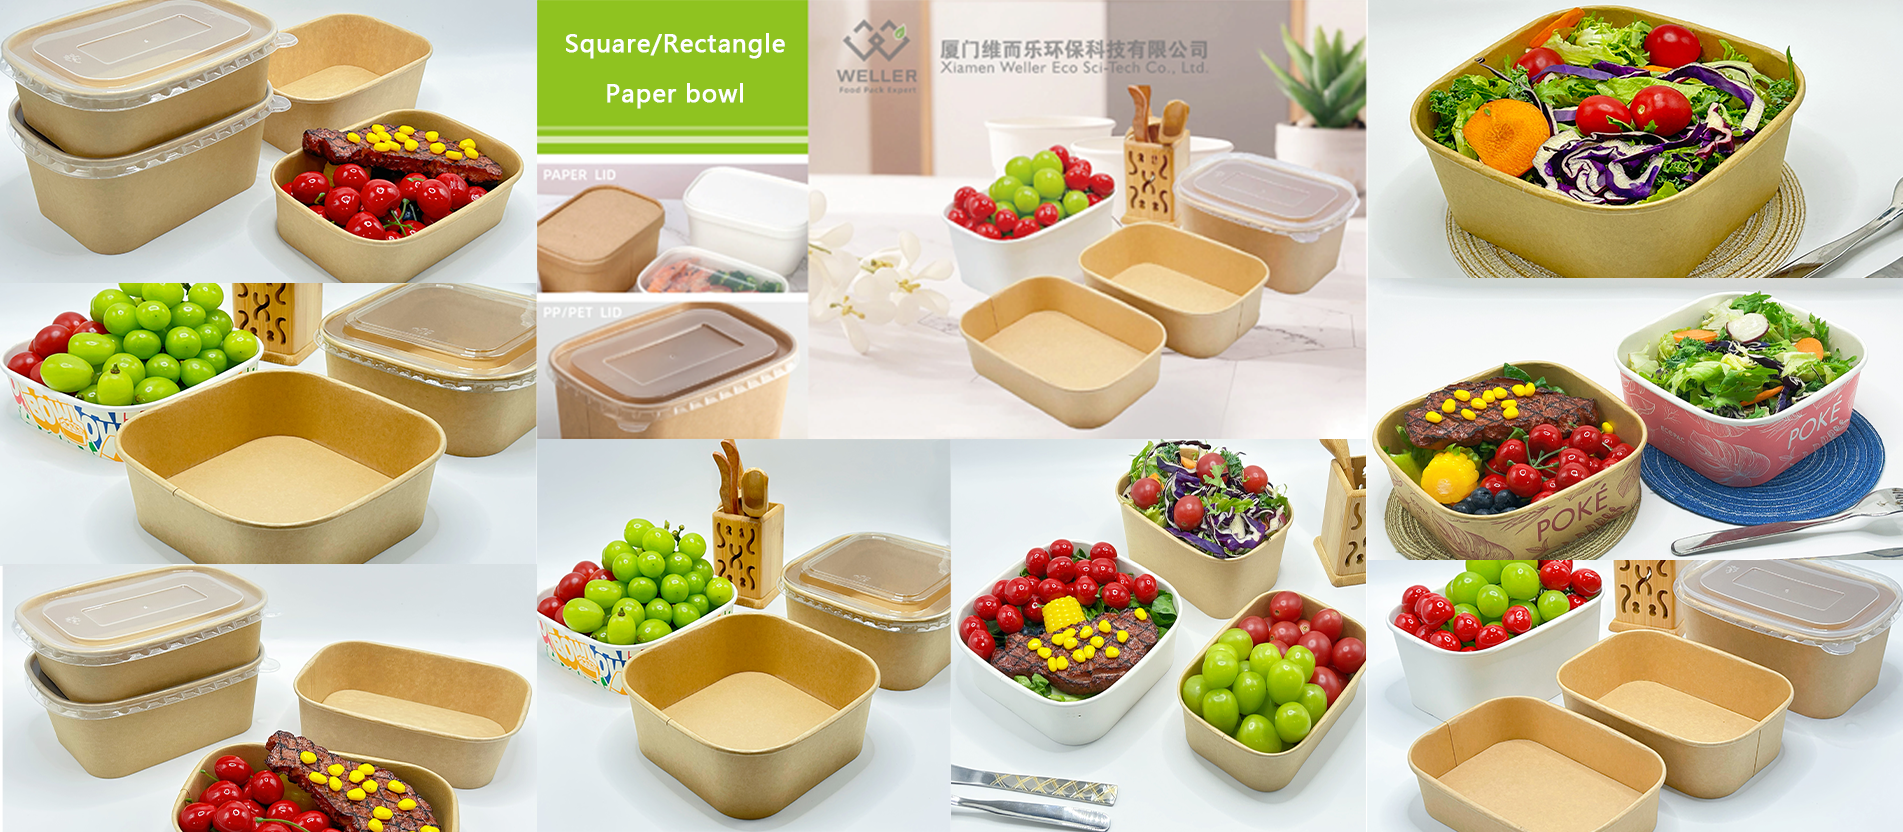 square and rectangle salad bowl